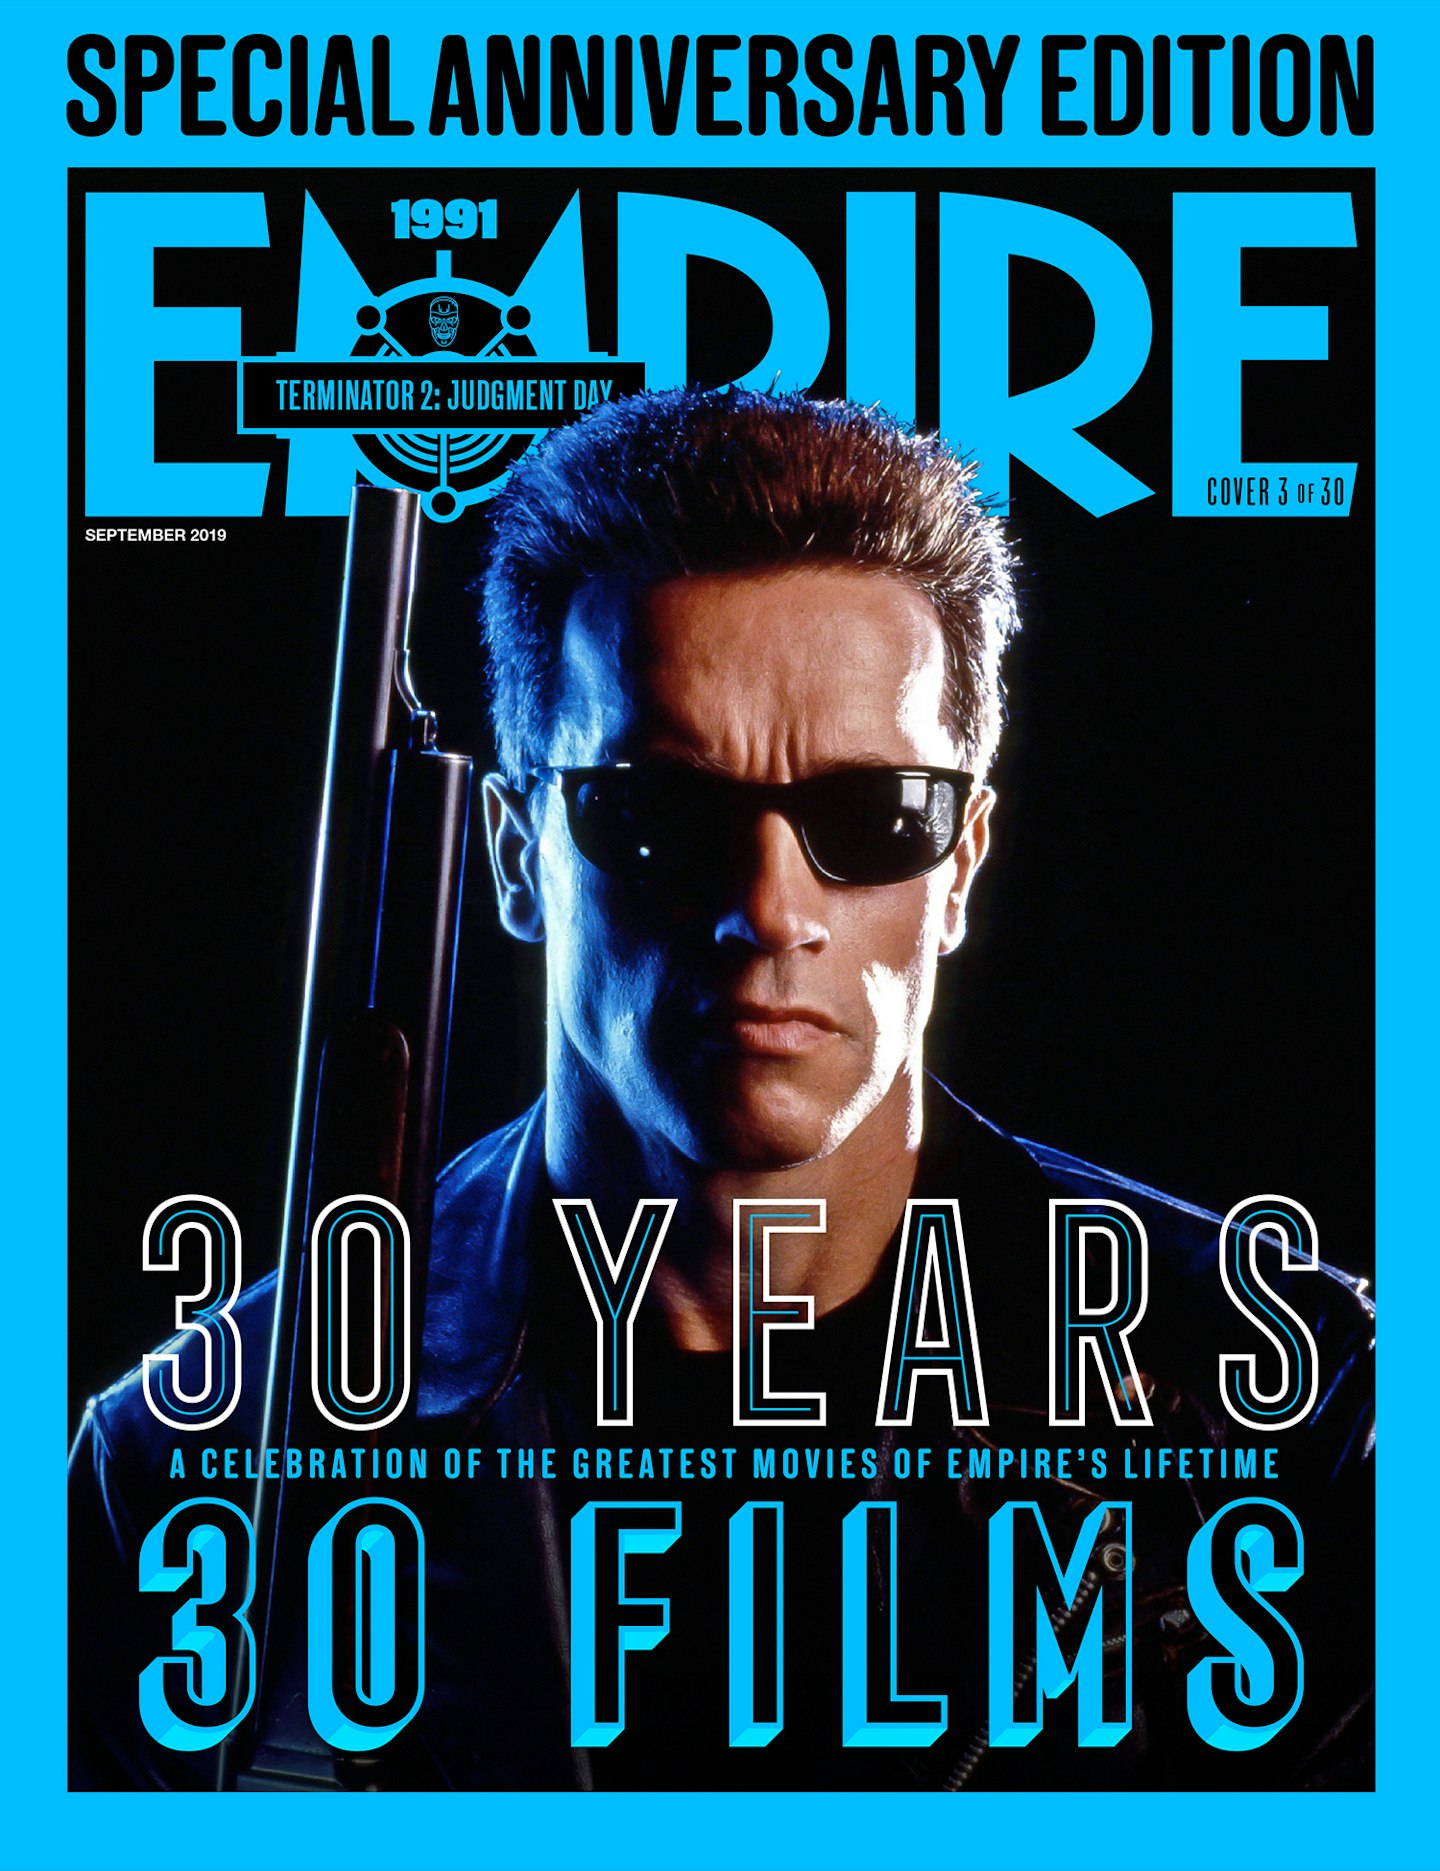 Empire's 30th Anniversary Edition Covers – Terminator 2: Judgment Day